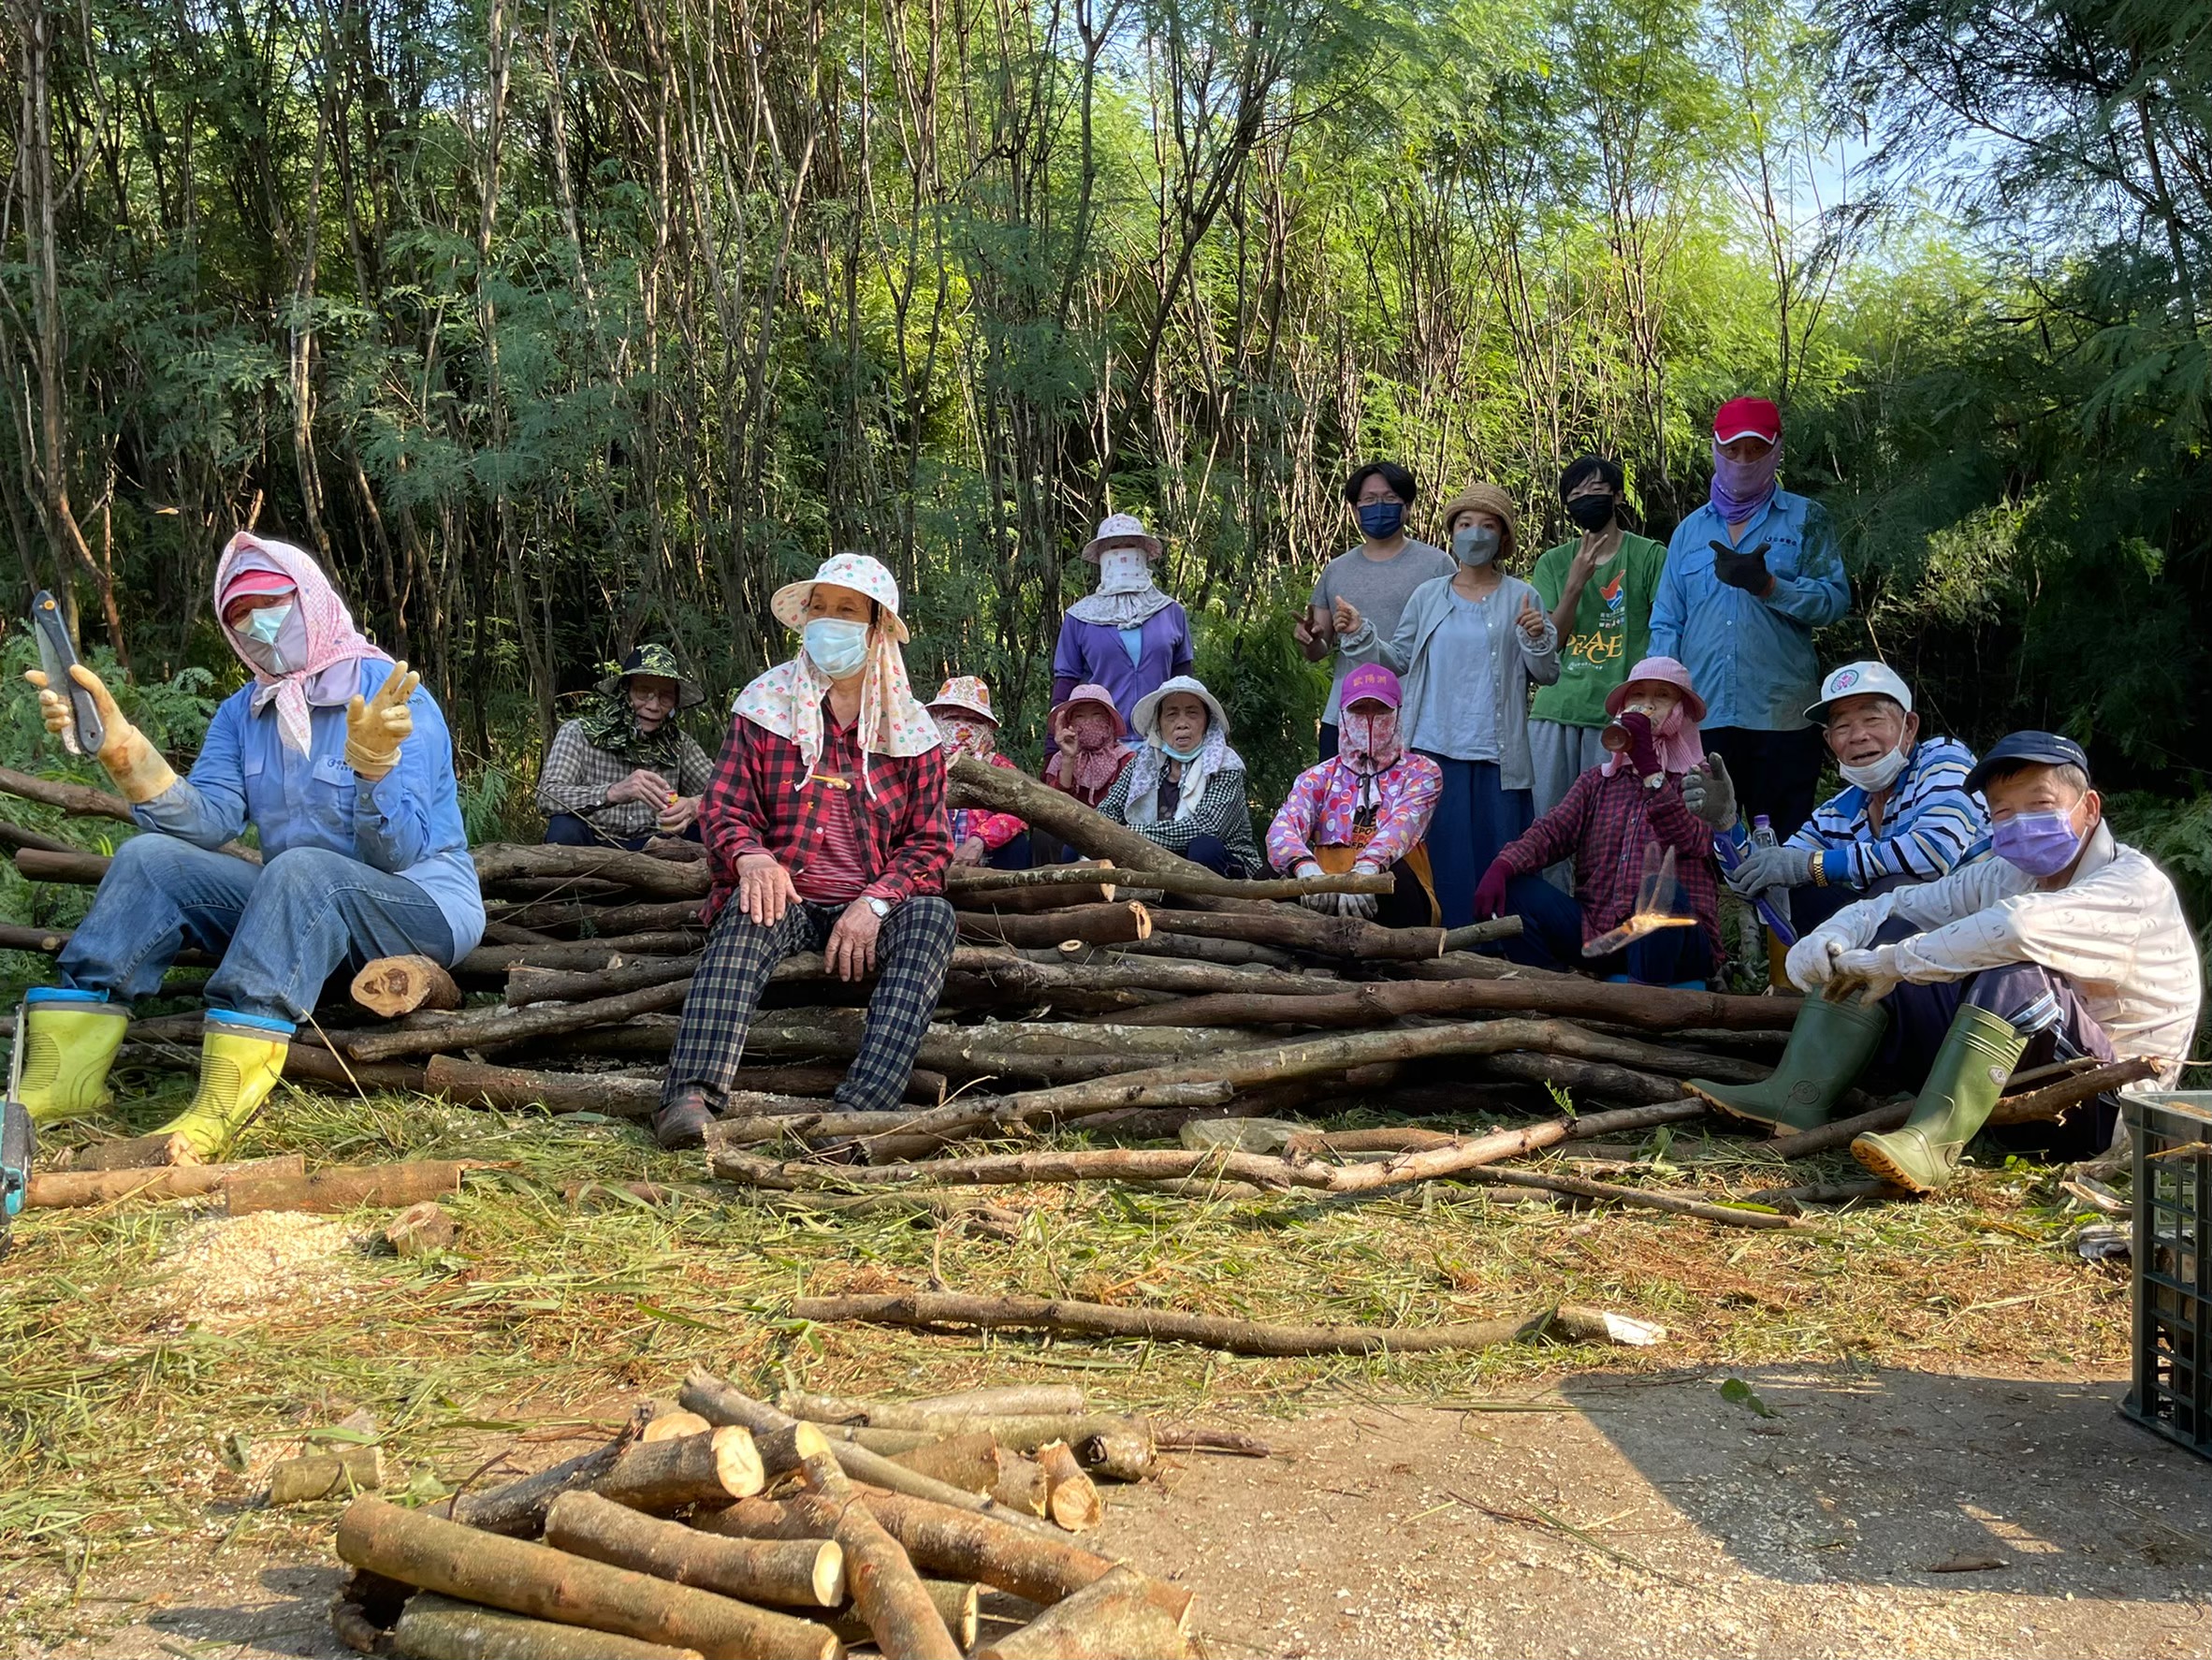 The team “樸植作工作室” works hand in hand with the elders of the Hudong Community to improve White Popinac of the community environment in Penghu